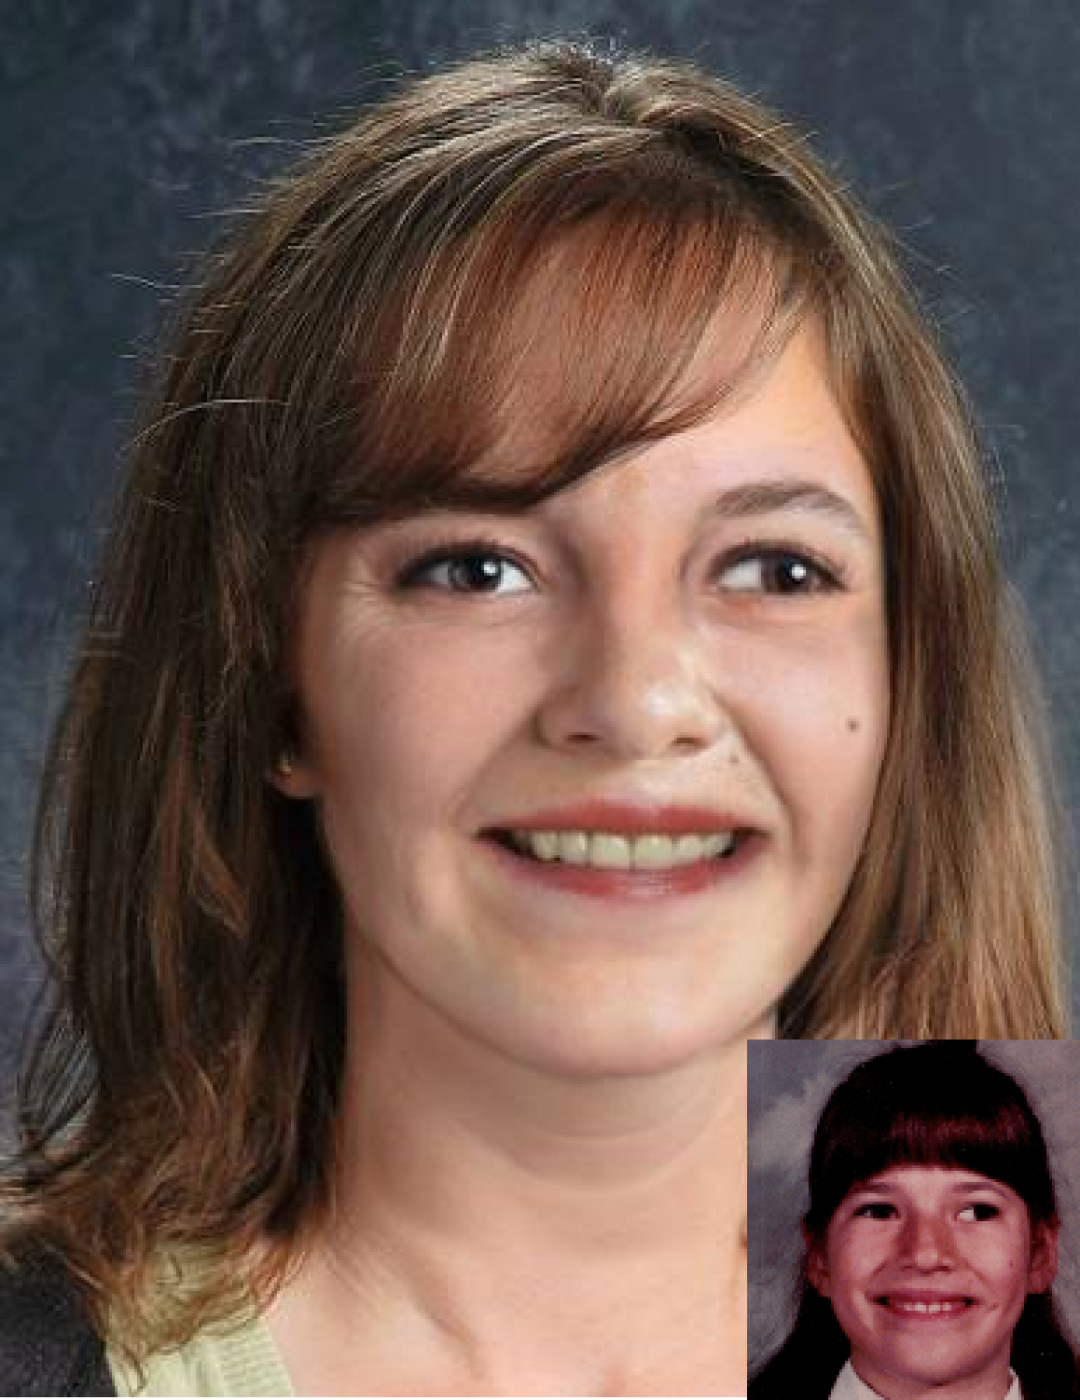 Tammy Belanger. Missing child with dark brown hair and brown eyes. Her left eye turns outward.